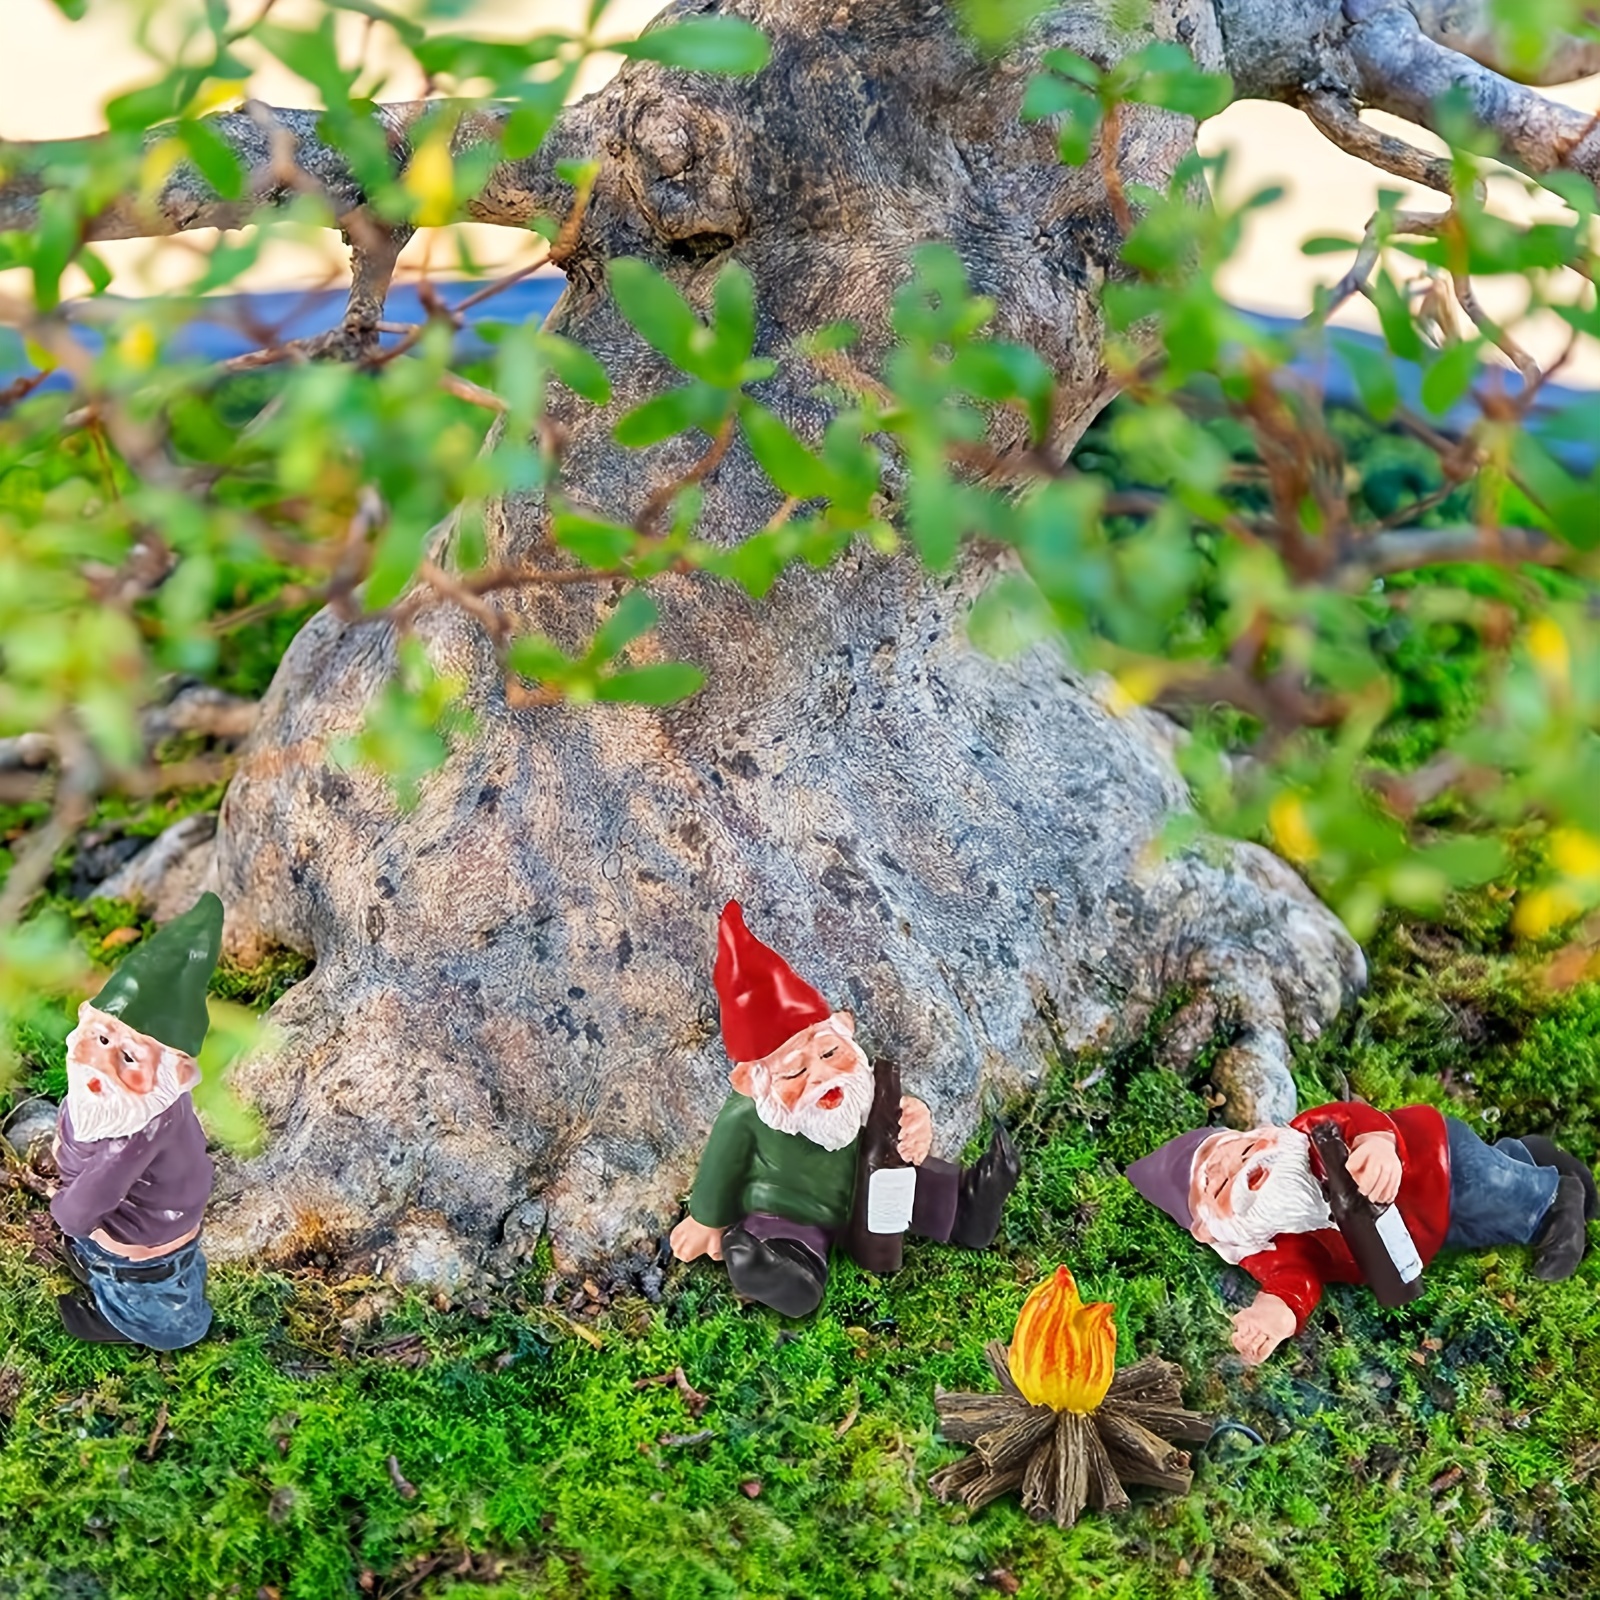 Black Briquettes Elves Fairy Garden Miniatures Cute Mini Gnomes For Moss  Terrariums And Crafty Nibbles Resin For Garden Decoration From Eshop2019,  $9.14